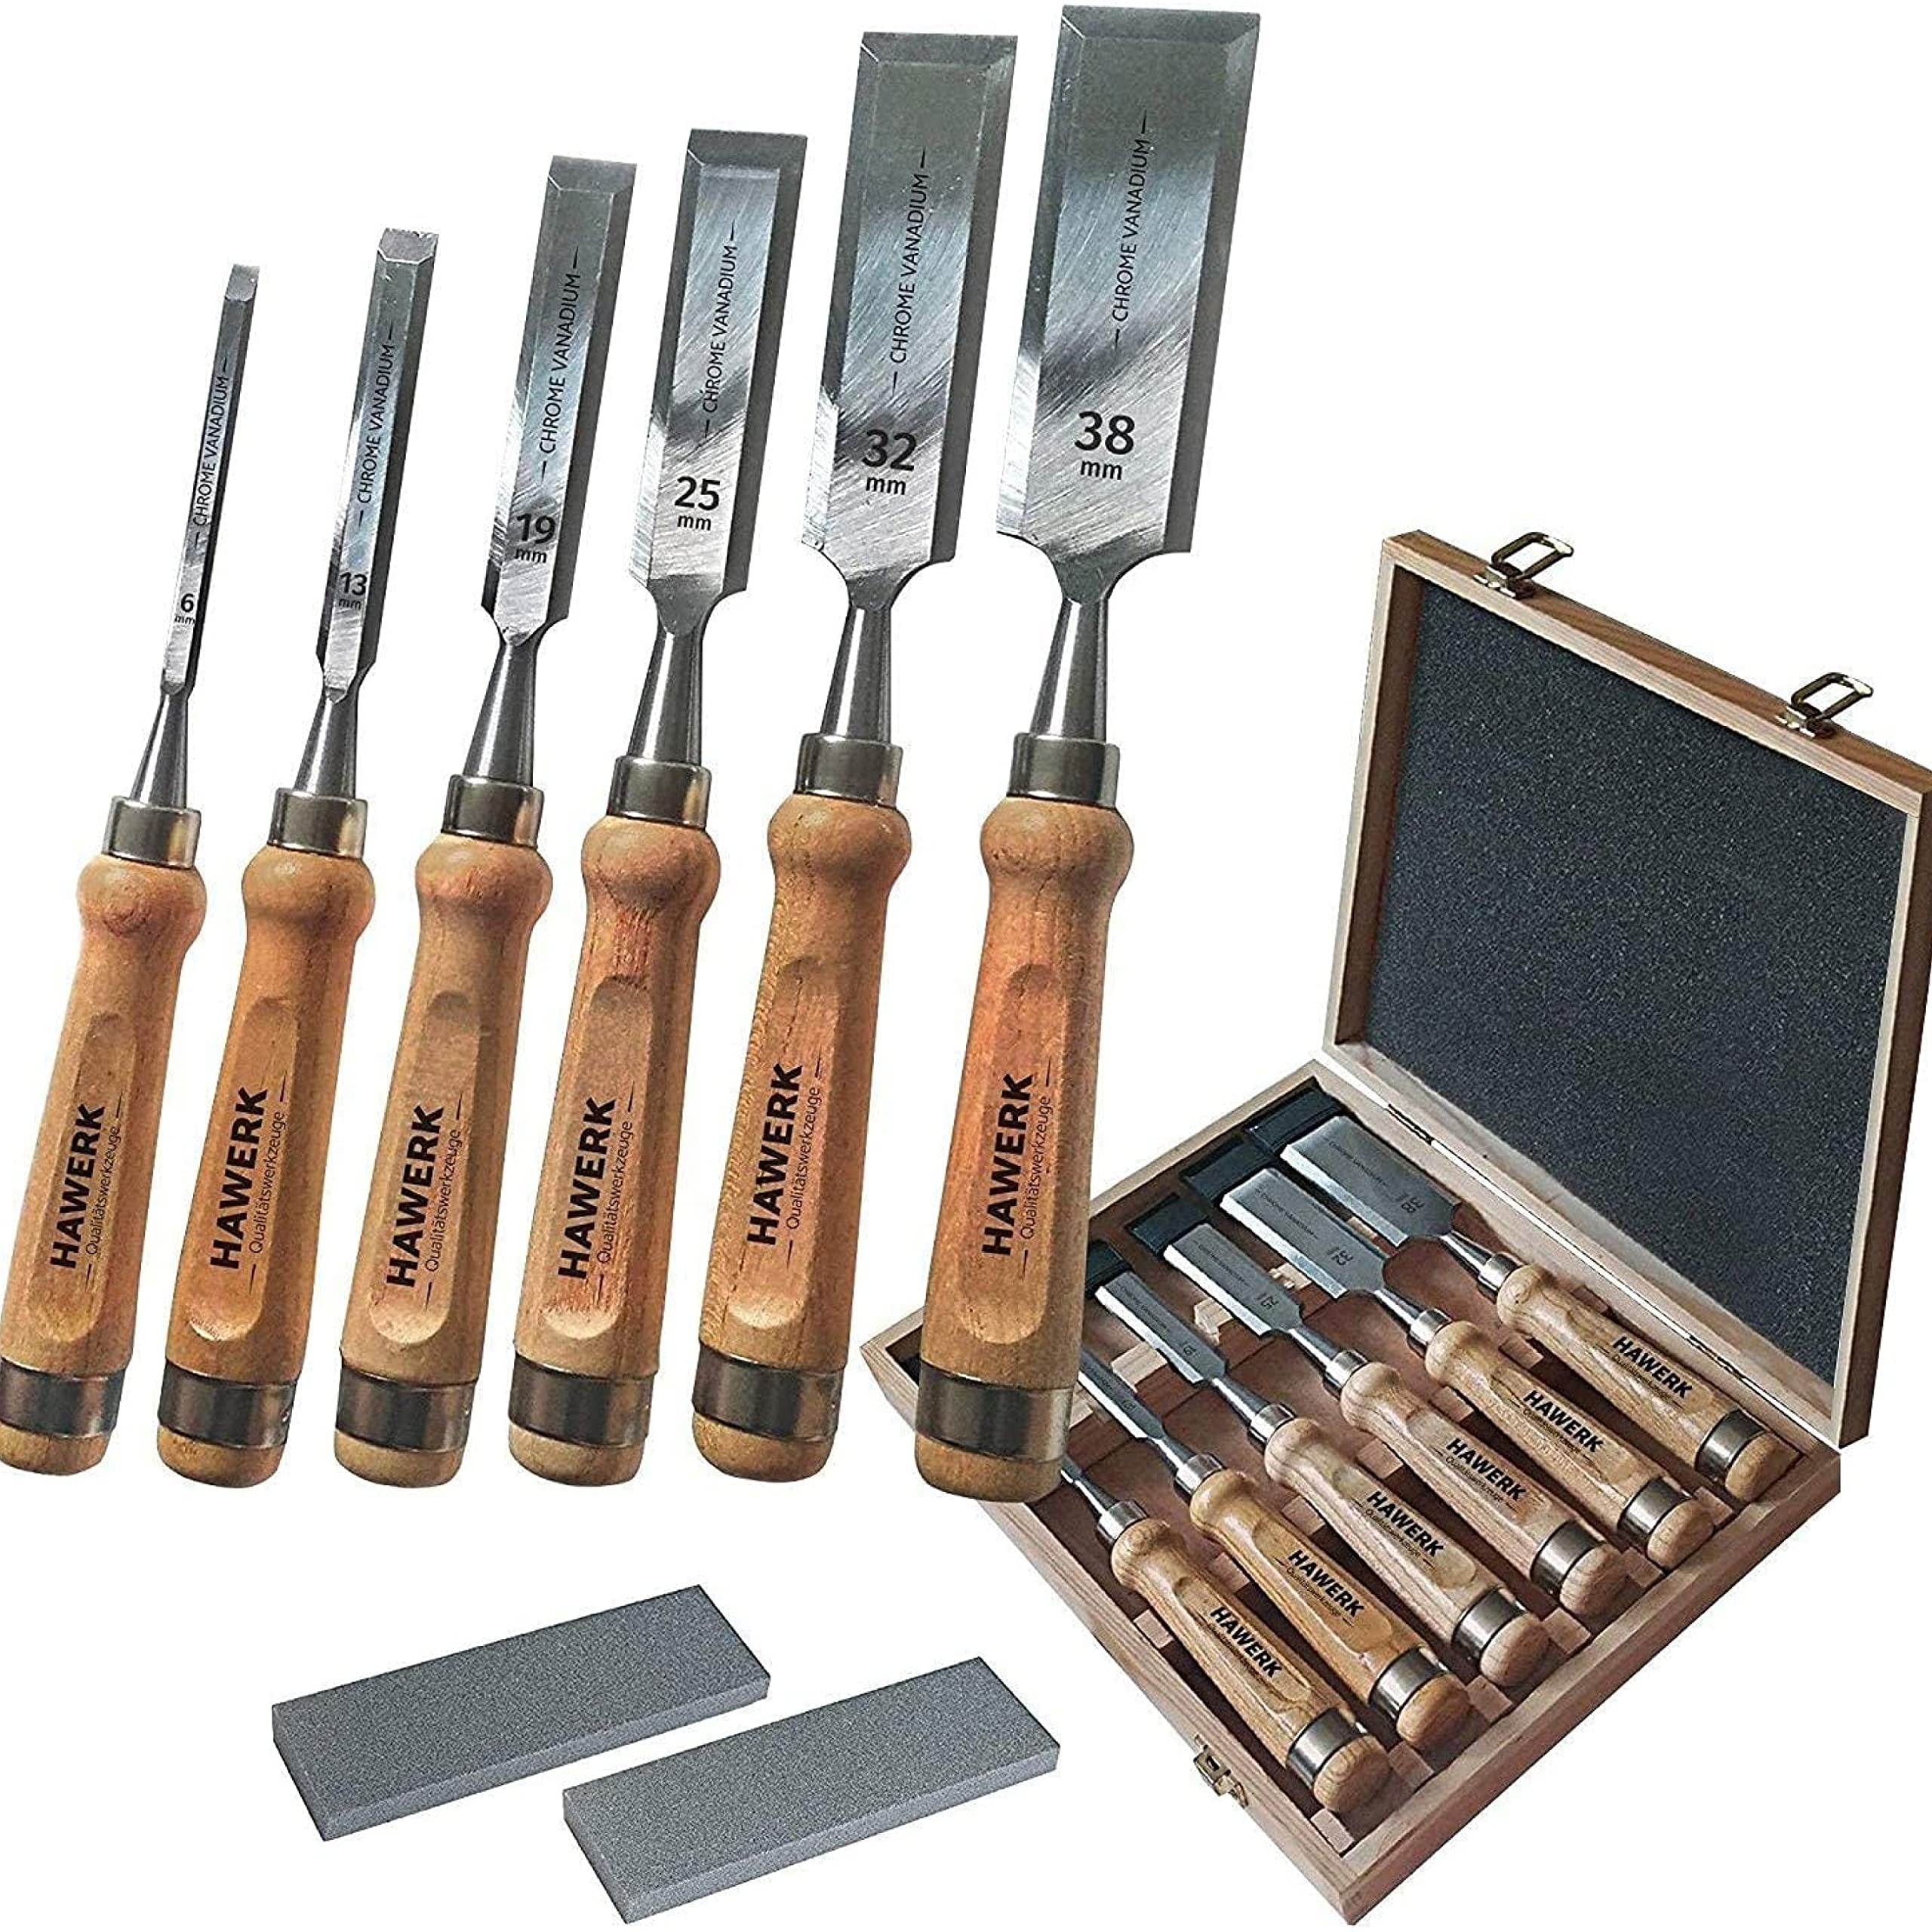 WRKSHP Wood Chisel Set (8 pcs) with Premium Wooden Storage Case, Sharpening  Stone, Honing Guide & Protective Caps - Wood Chisels for Woodworking